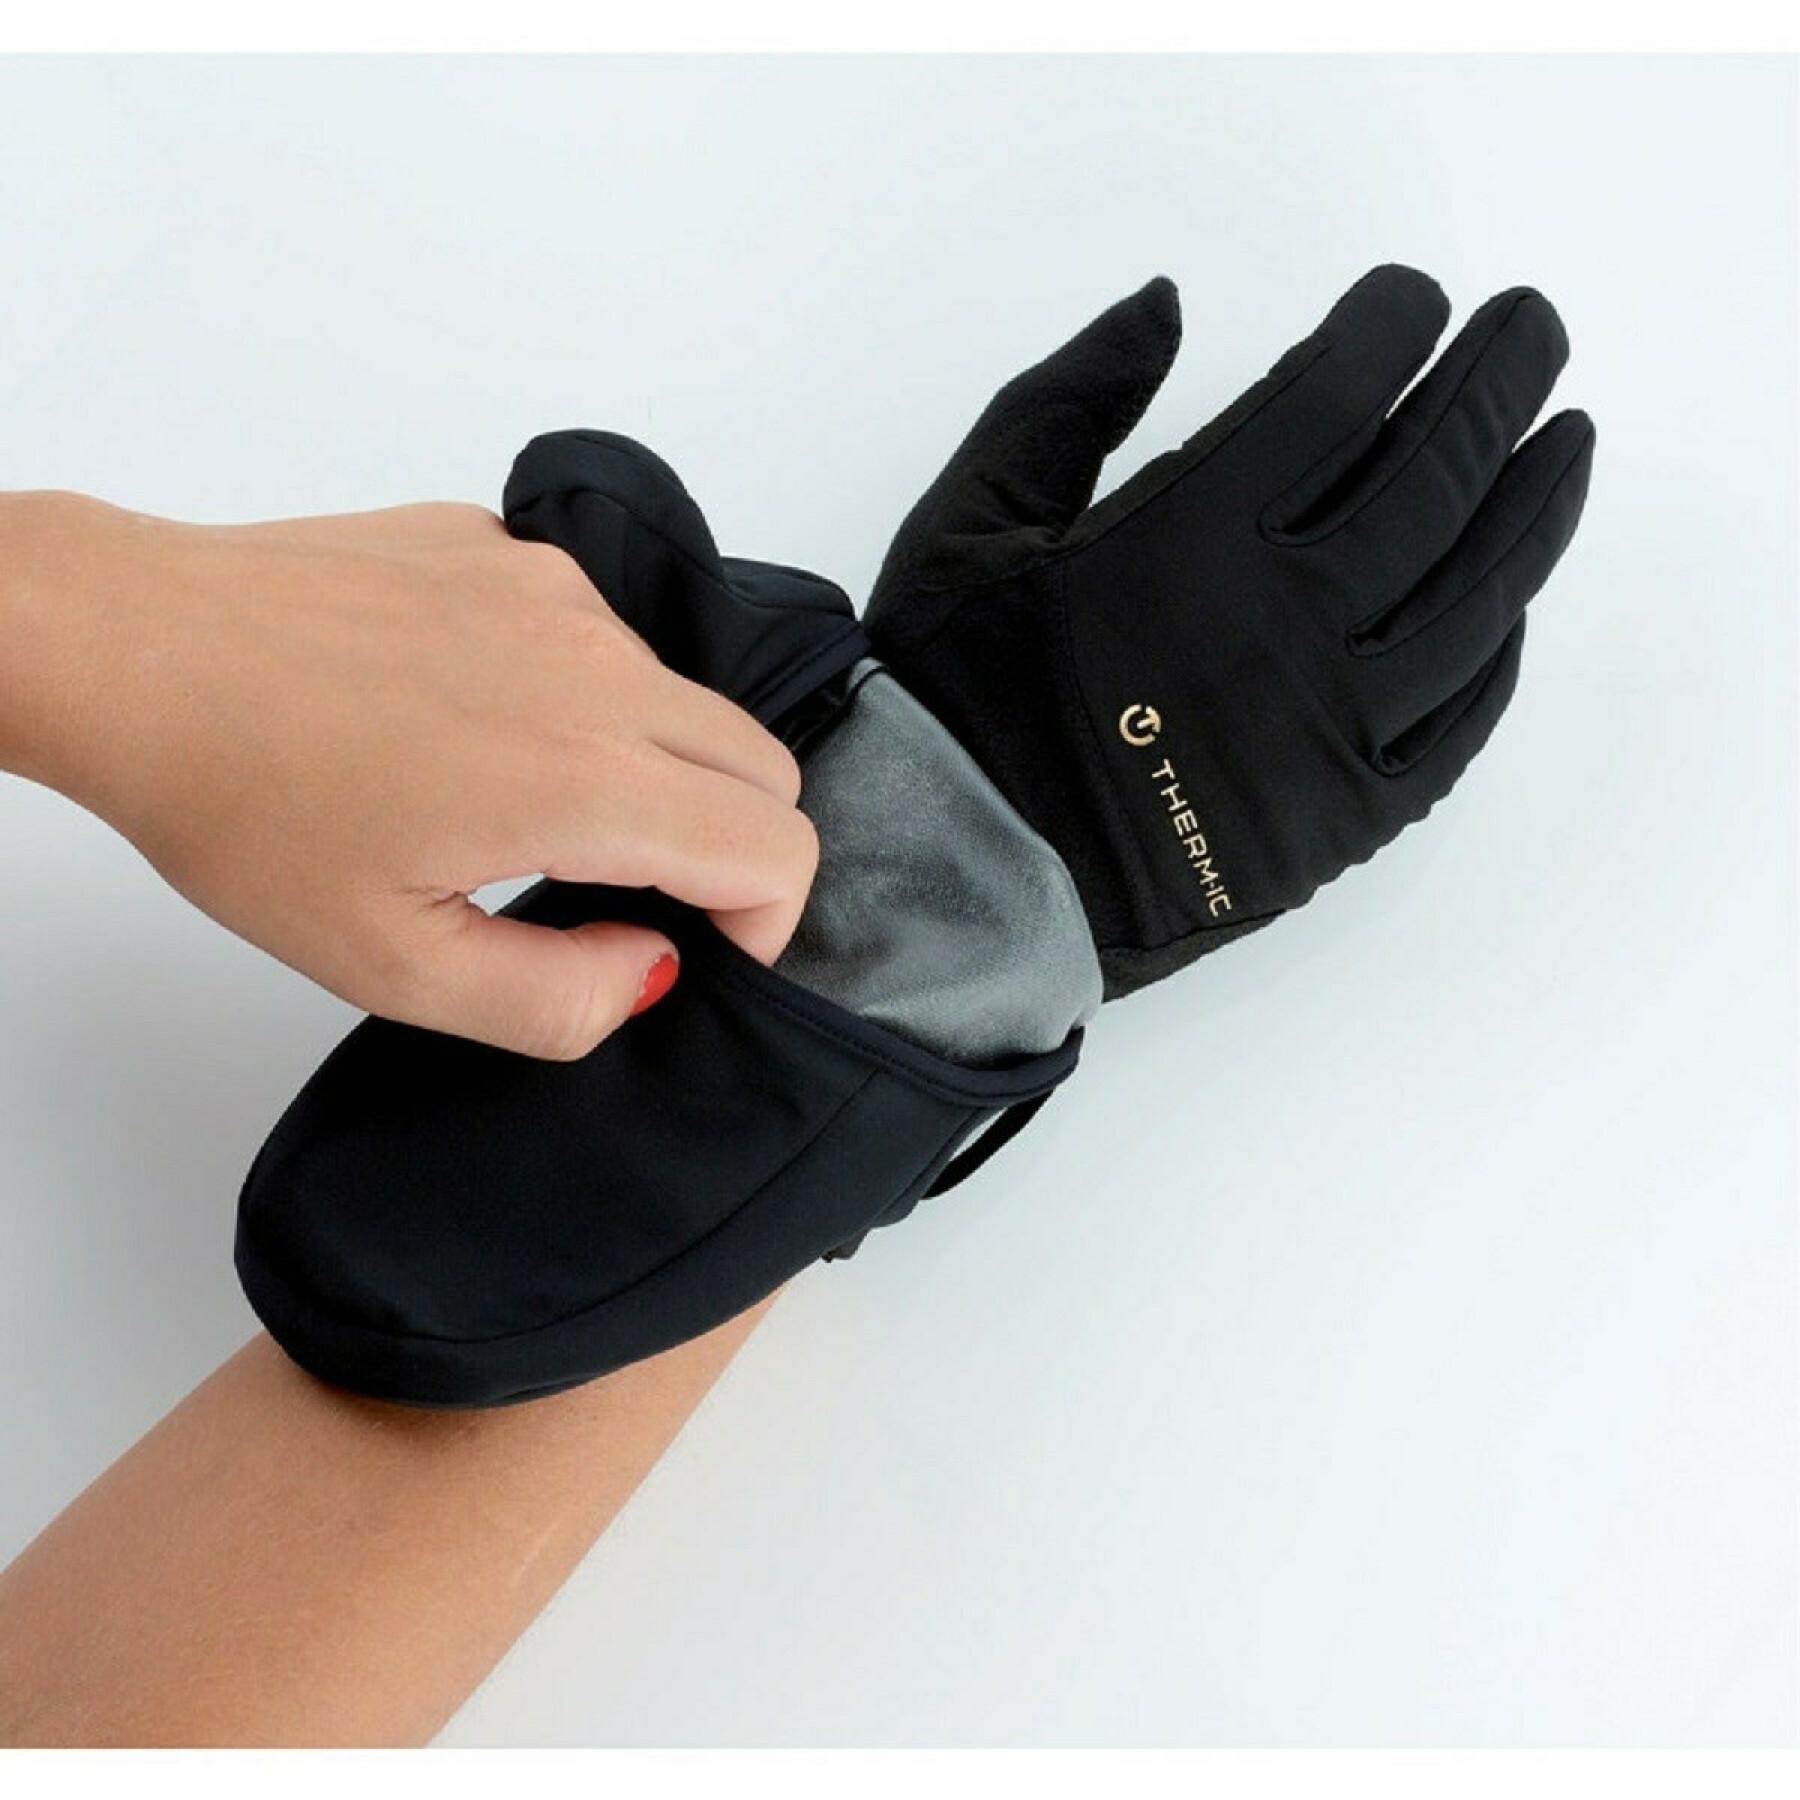 Gloves convertible into mittens Therm-Ic